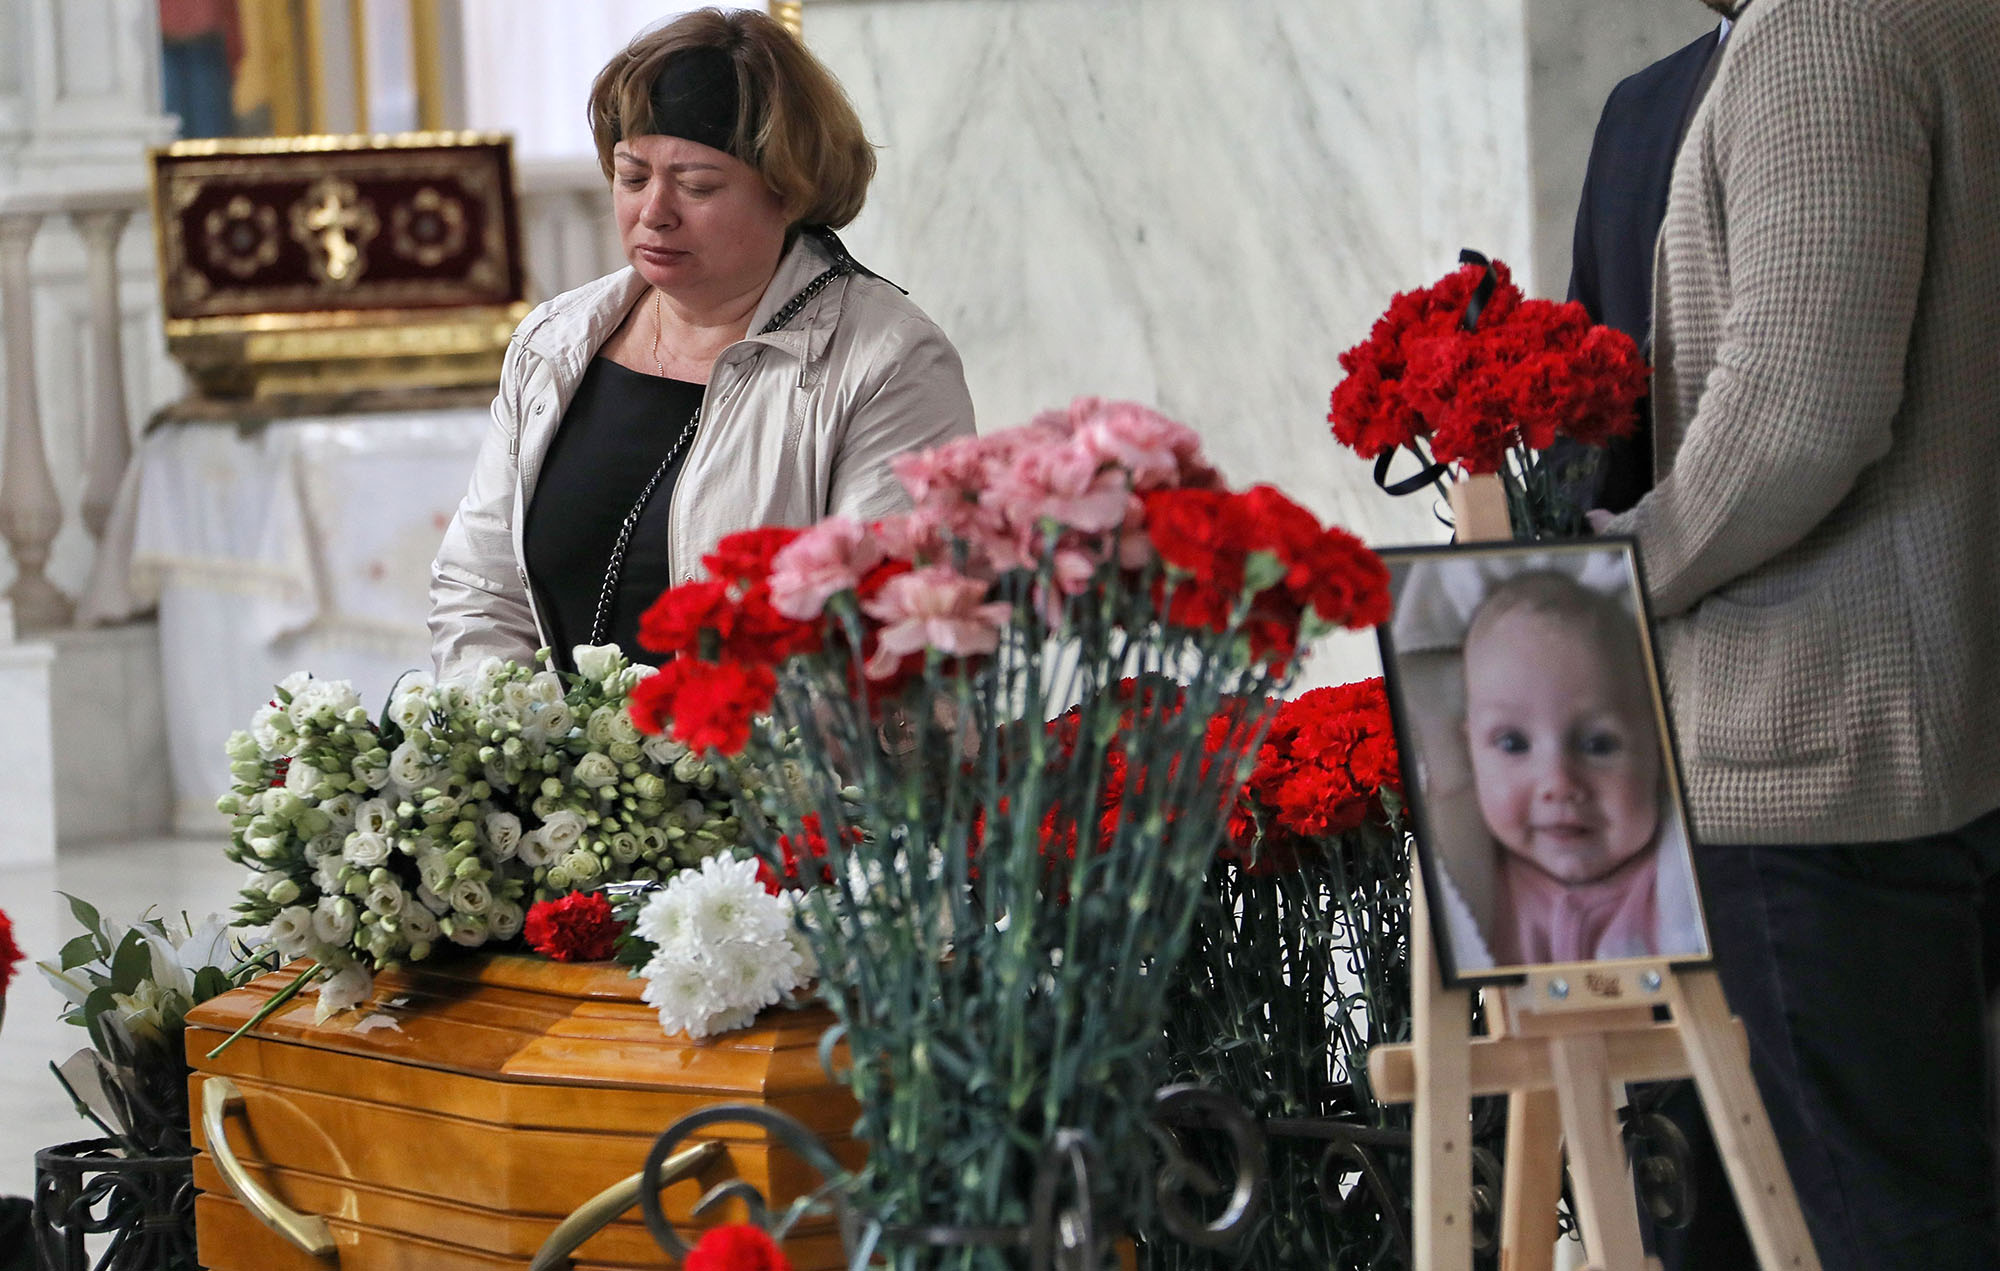 Relatives and friends attend the funeral service of Valeriia Hlodan, her three-month-old baby girl Kira and her mother Liudmyla Yavkina at Transfiguration Cathedral, Odesa, southern Ukraine, on April 27, 2022. The women and an infant were killed after one of the Russian cruise missiles launched against Odesa hit an apartment block.